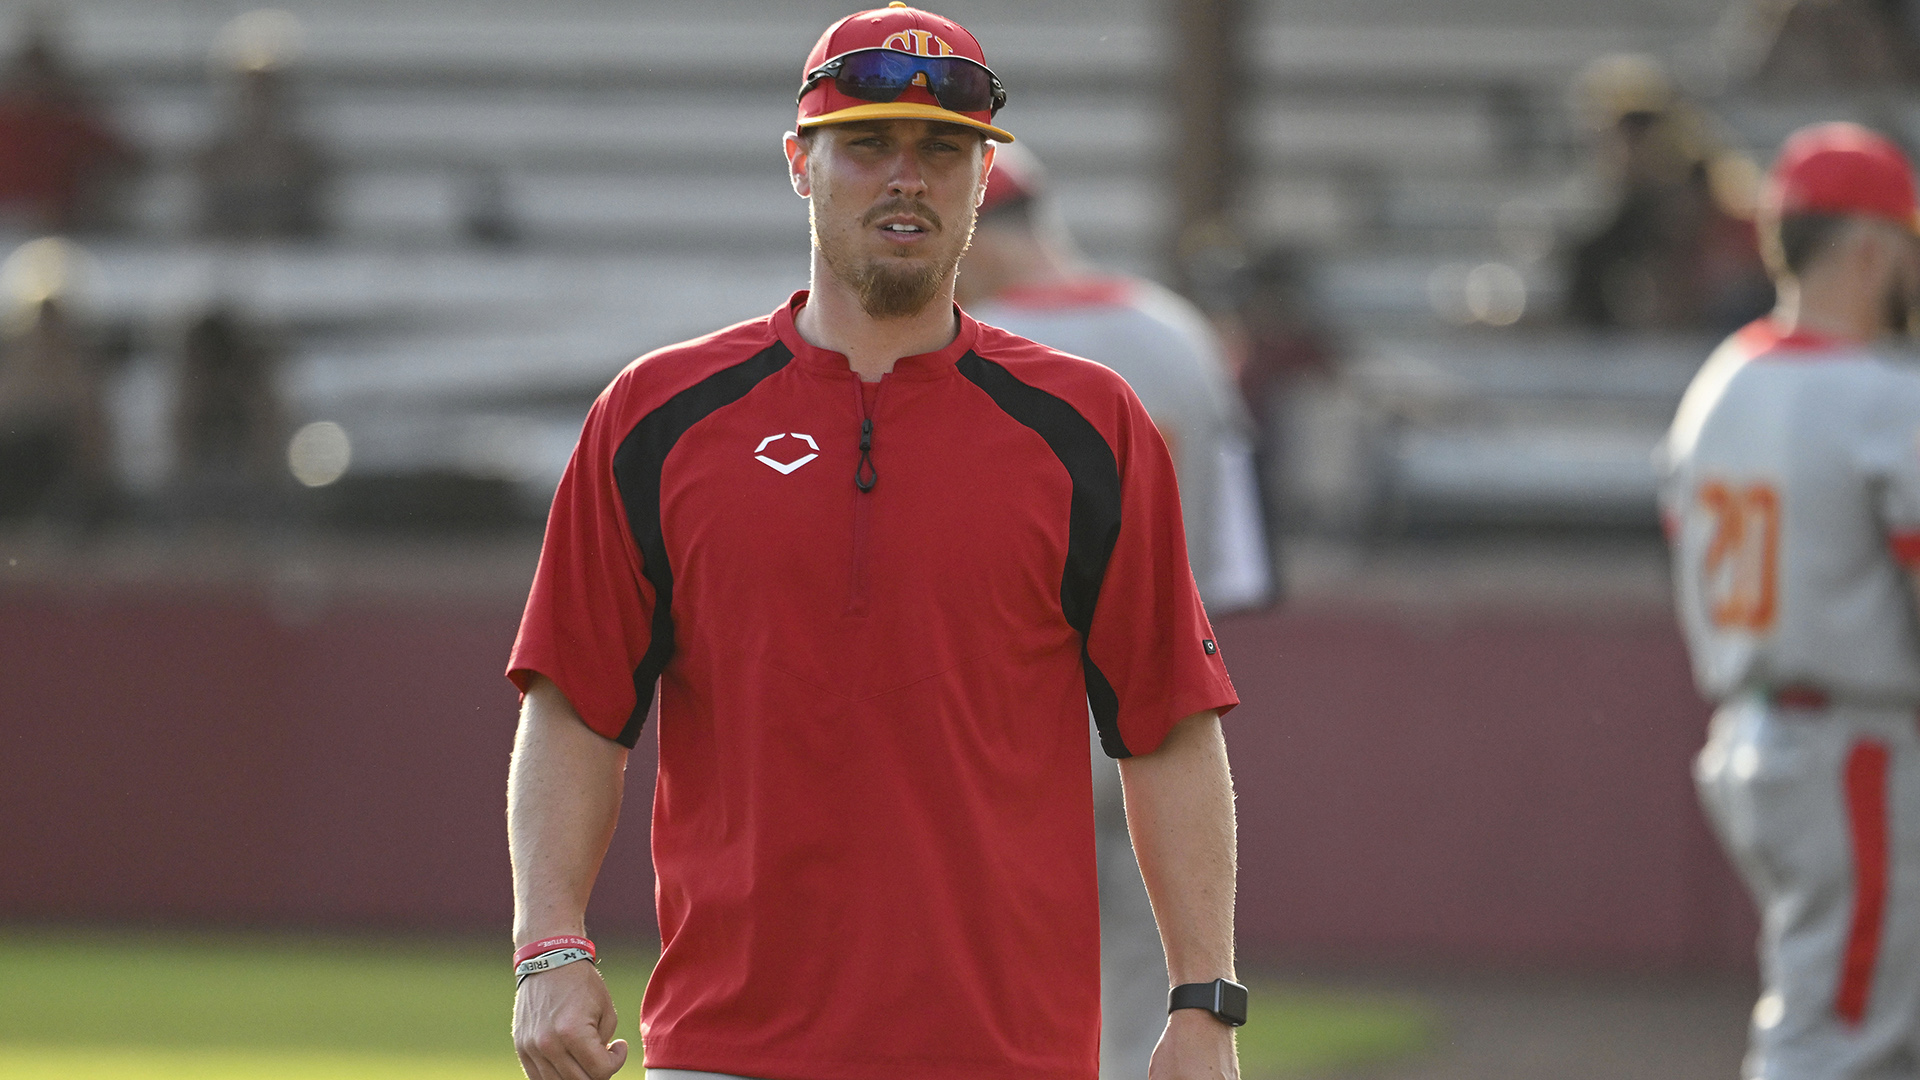 Klosterman tabs Tim Cronin as new pitching coach